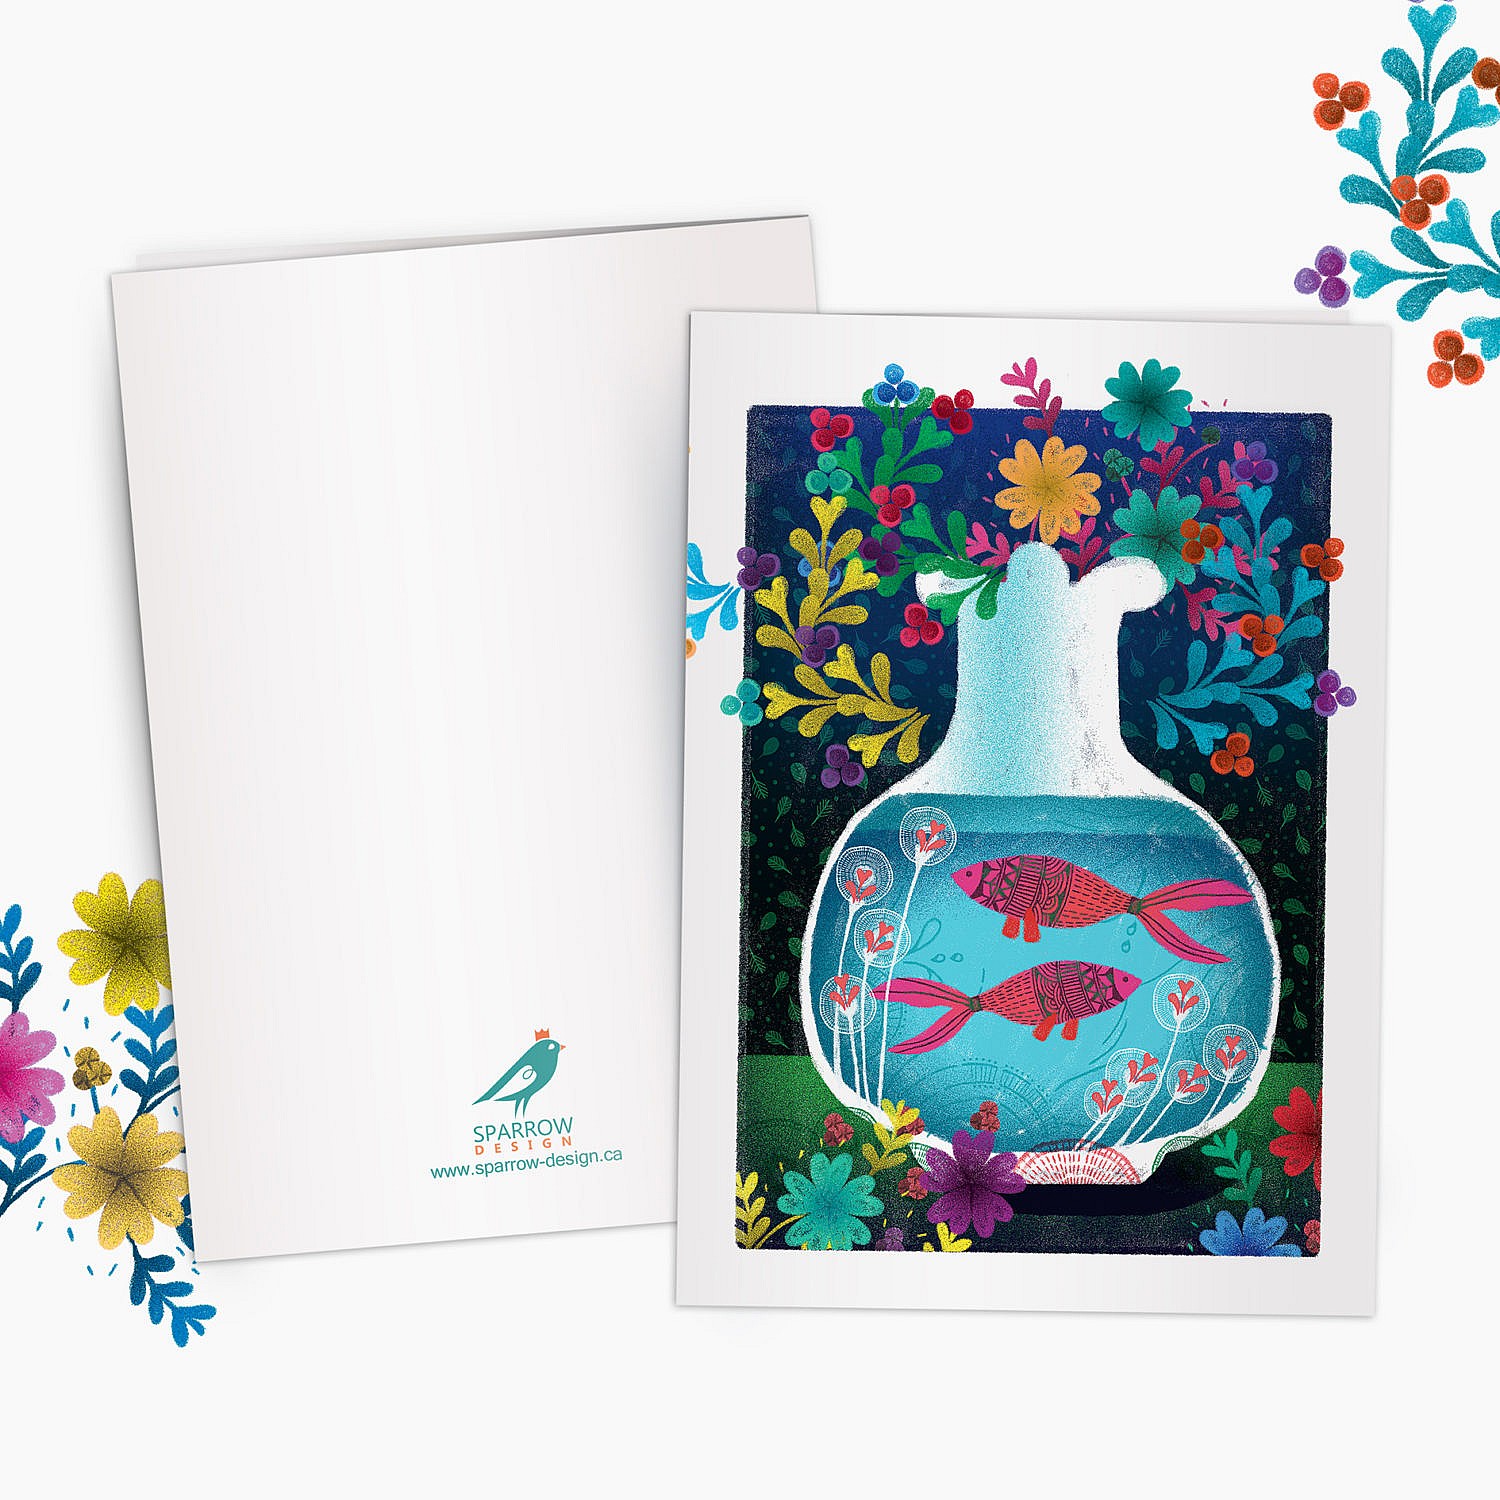 The image is showing a spring scenery. Two beautiful goldfish are in the foreground. On the background there are colorful flowers. This greeting card is perfect for nowruz festival.